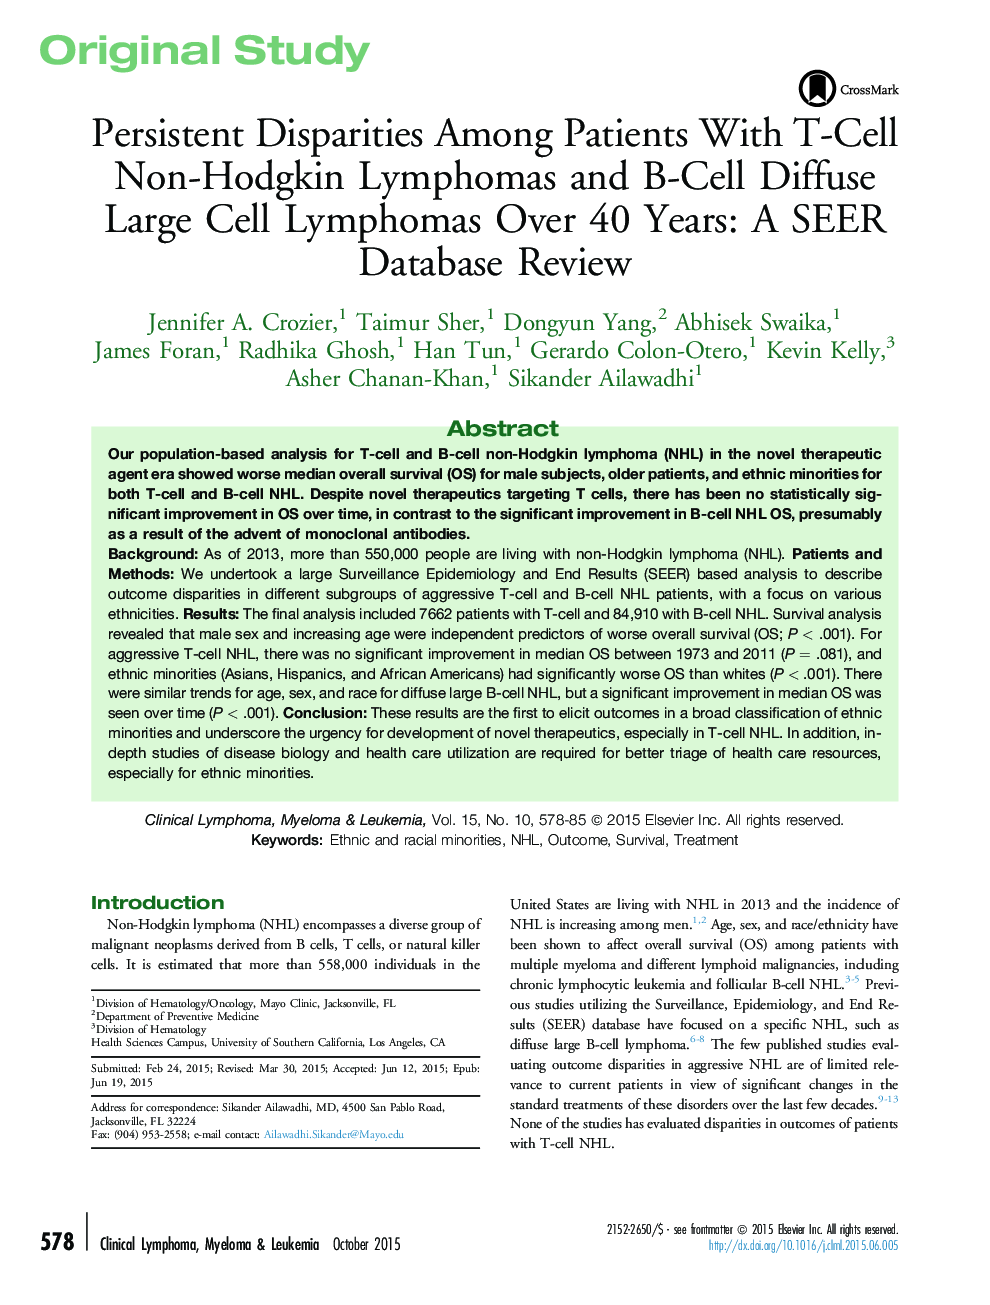 Persistent Disparities Among Patients With T-Cell Non-Hodgkin Lymphomas and B-Cell Diffuse Large Cell Lymphomas Over 40 Years: A SEER Database Review